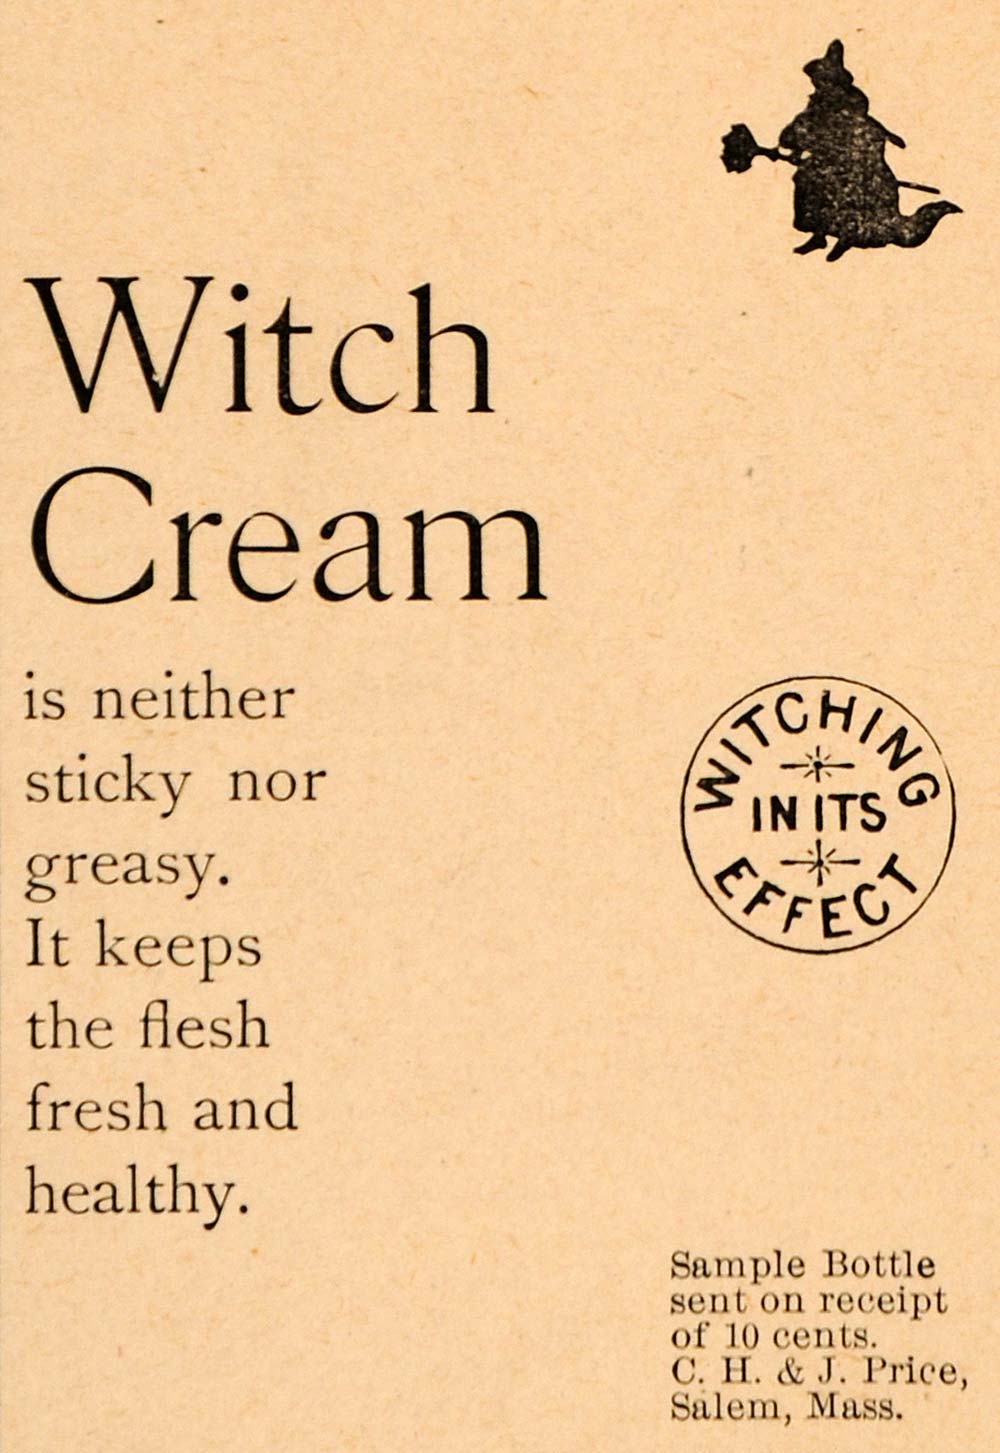 1892 Ad C H & J Price Witch Cream Skin Care Products - ORIGINAL ADVERTISING LHJ4